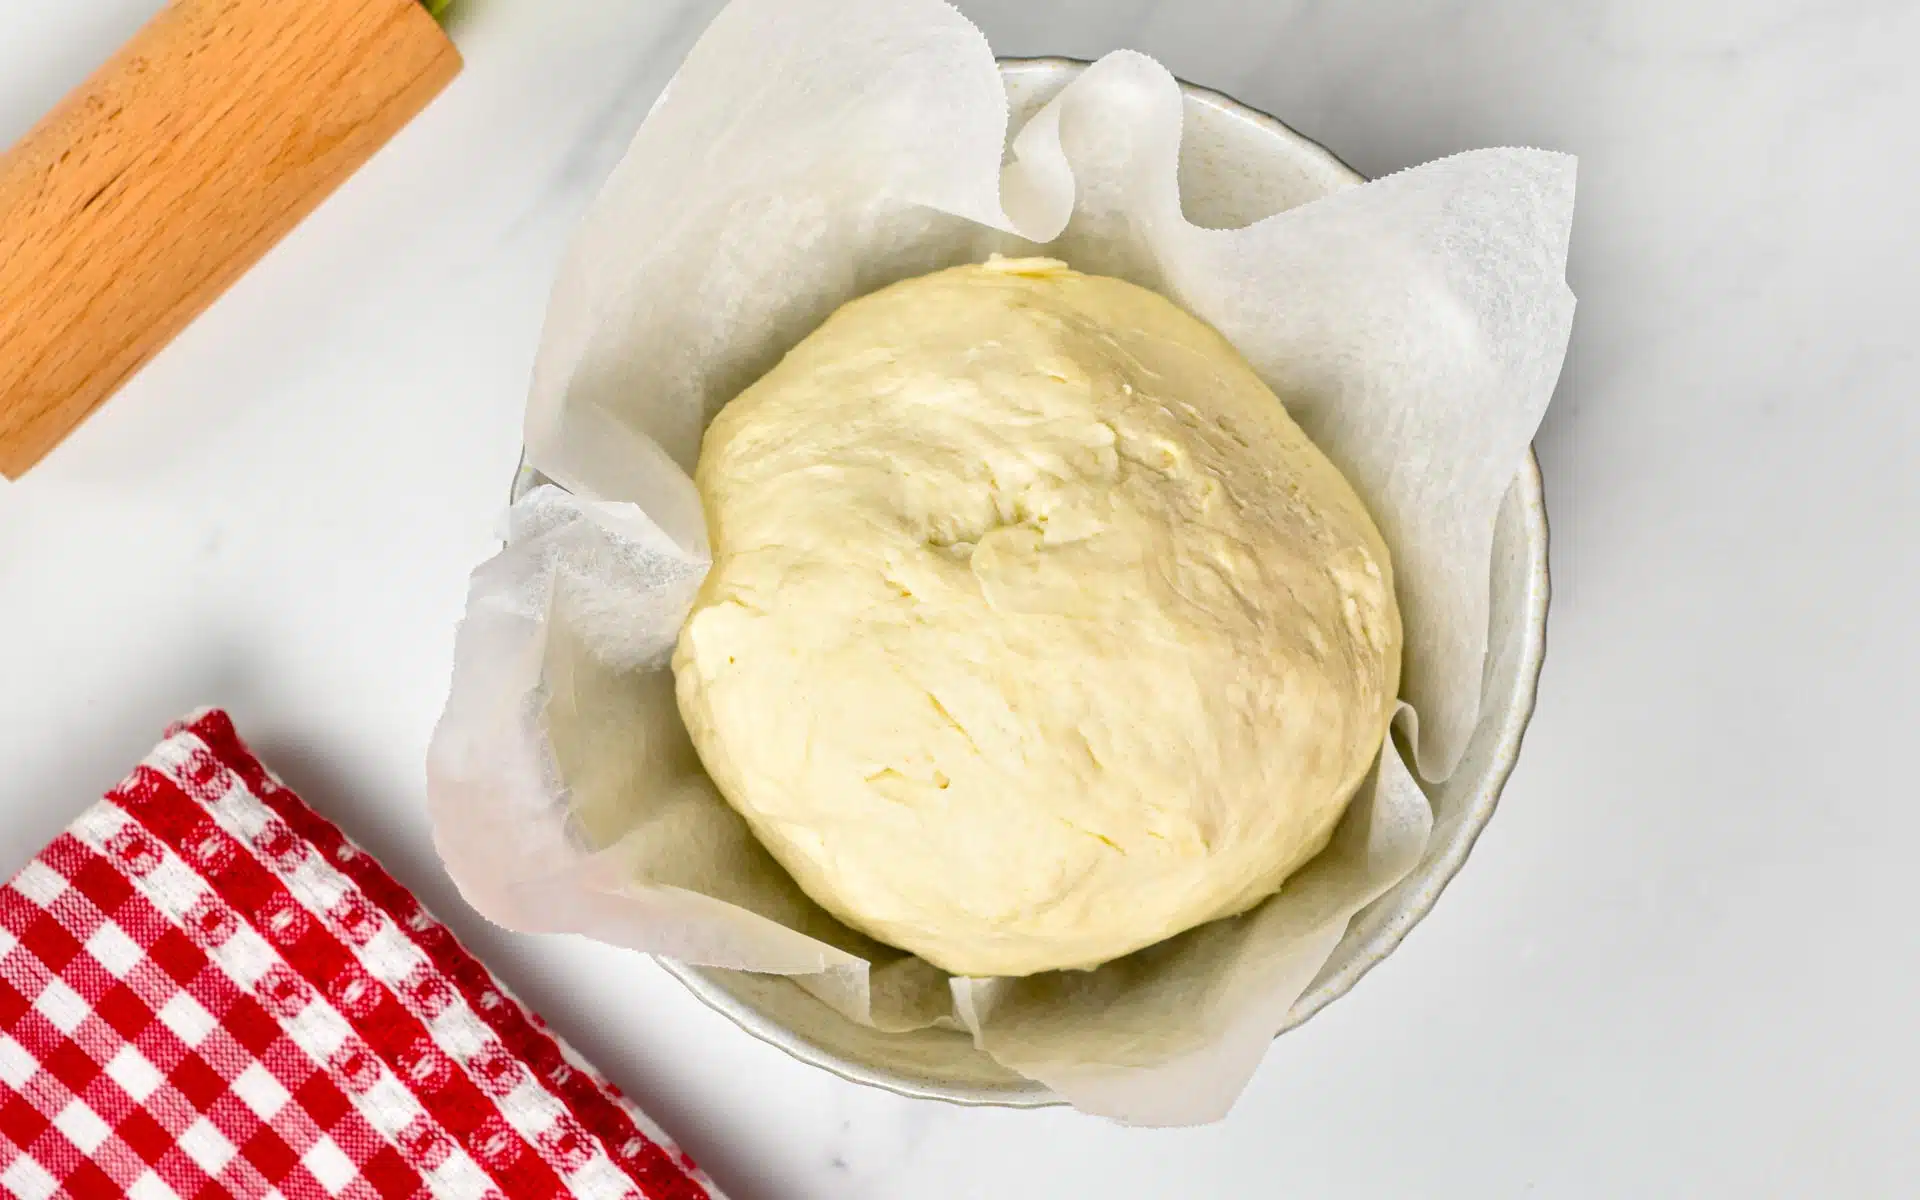 This 3 ingredient Pizza Dough is the most easy high-protein pizza dough you will ever try. It's a yeast free dough for busy pizza nights.